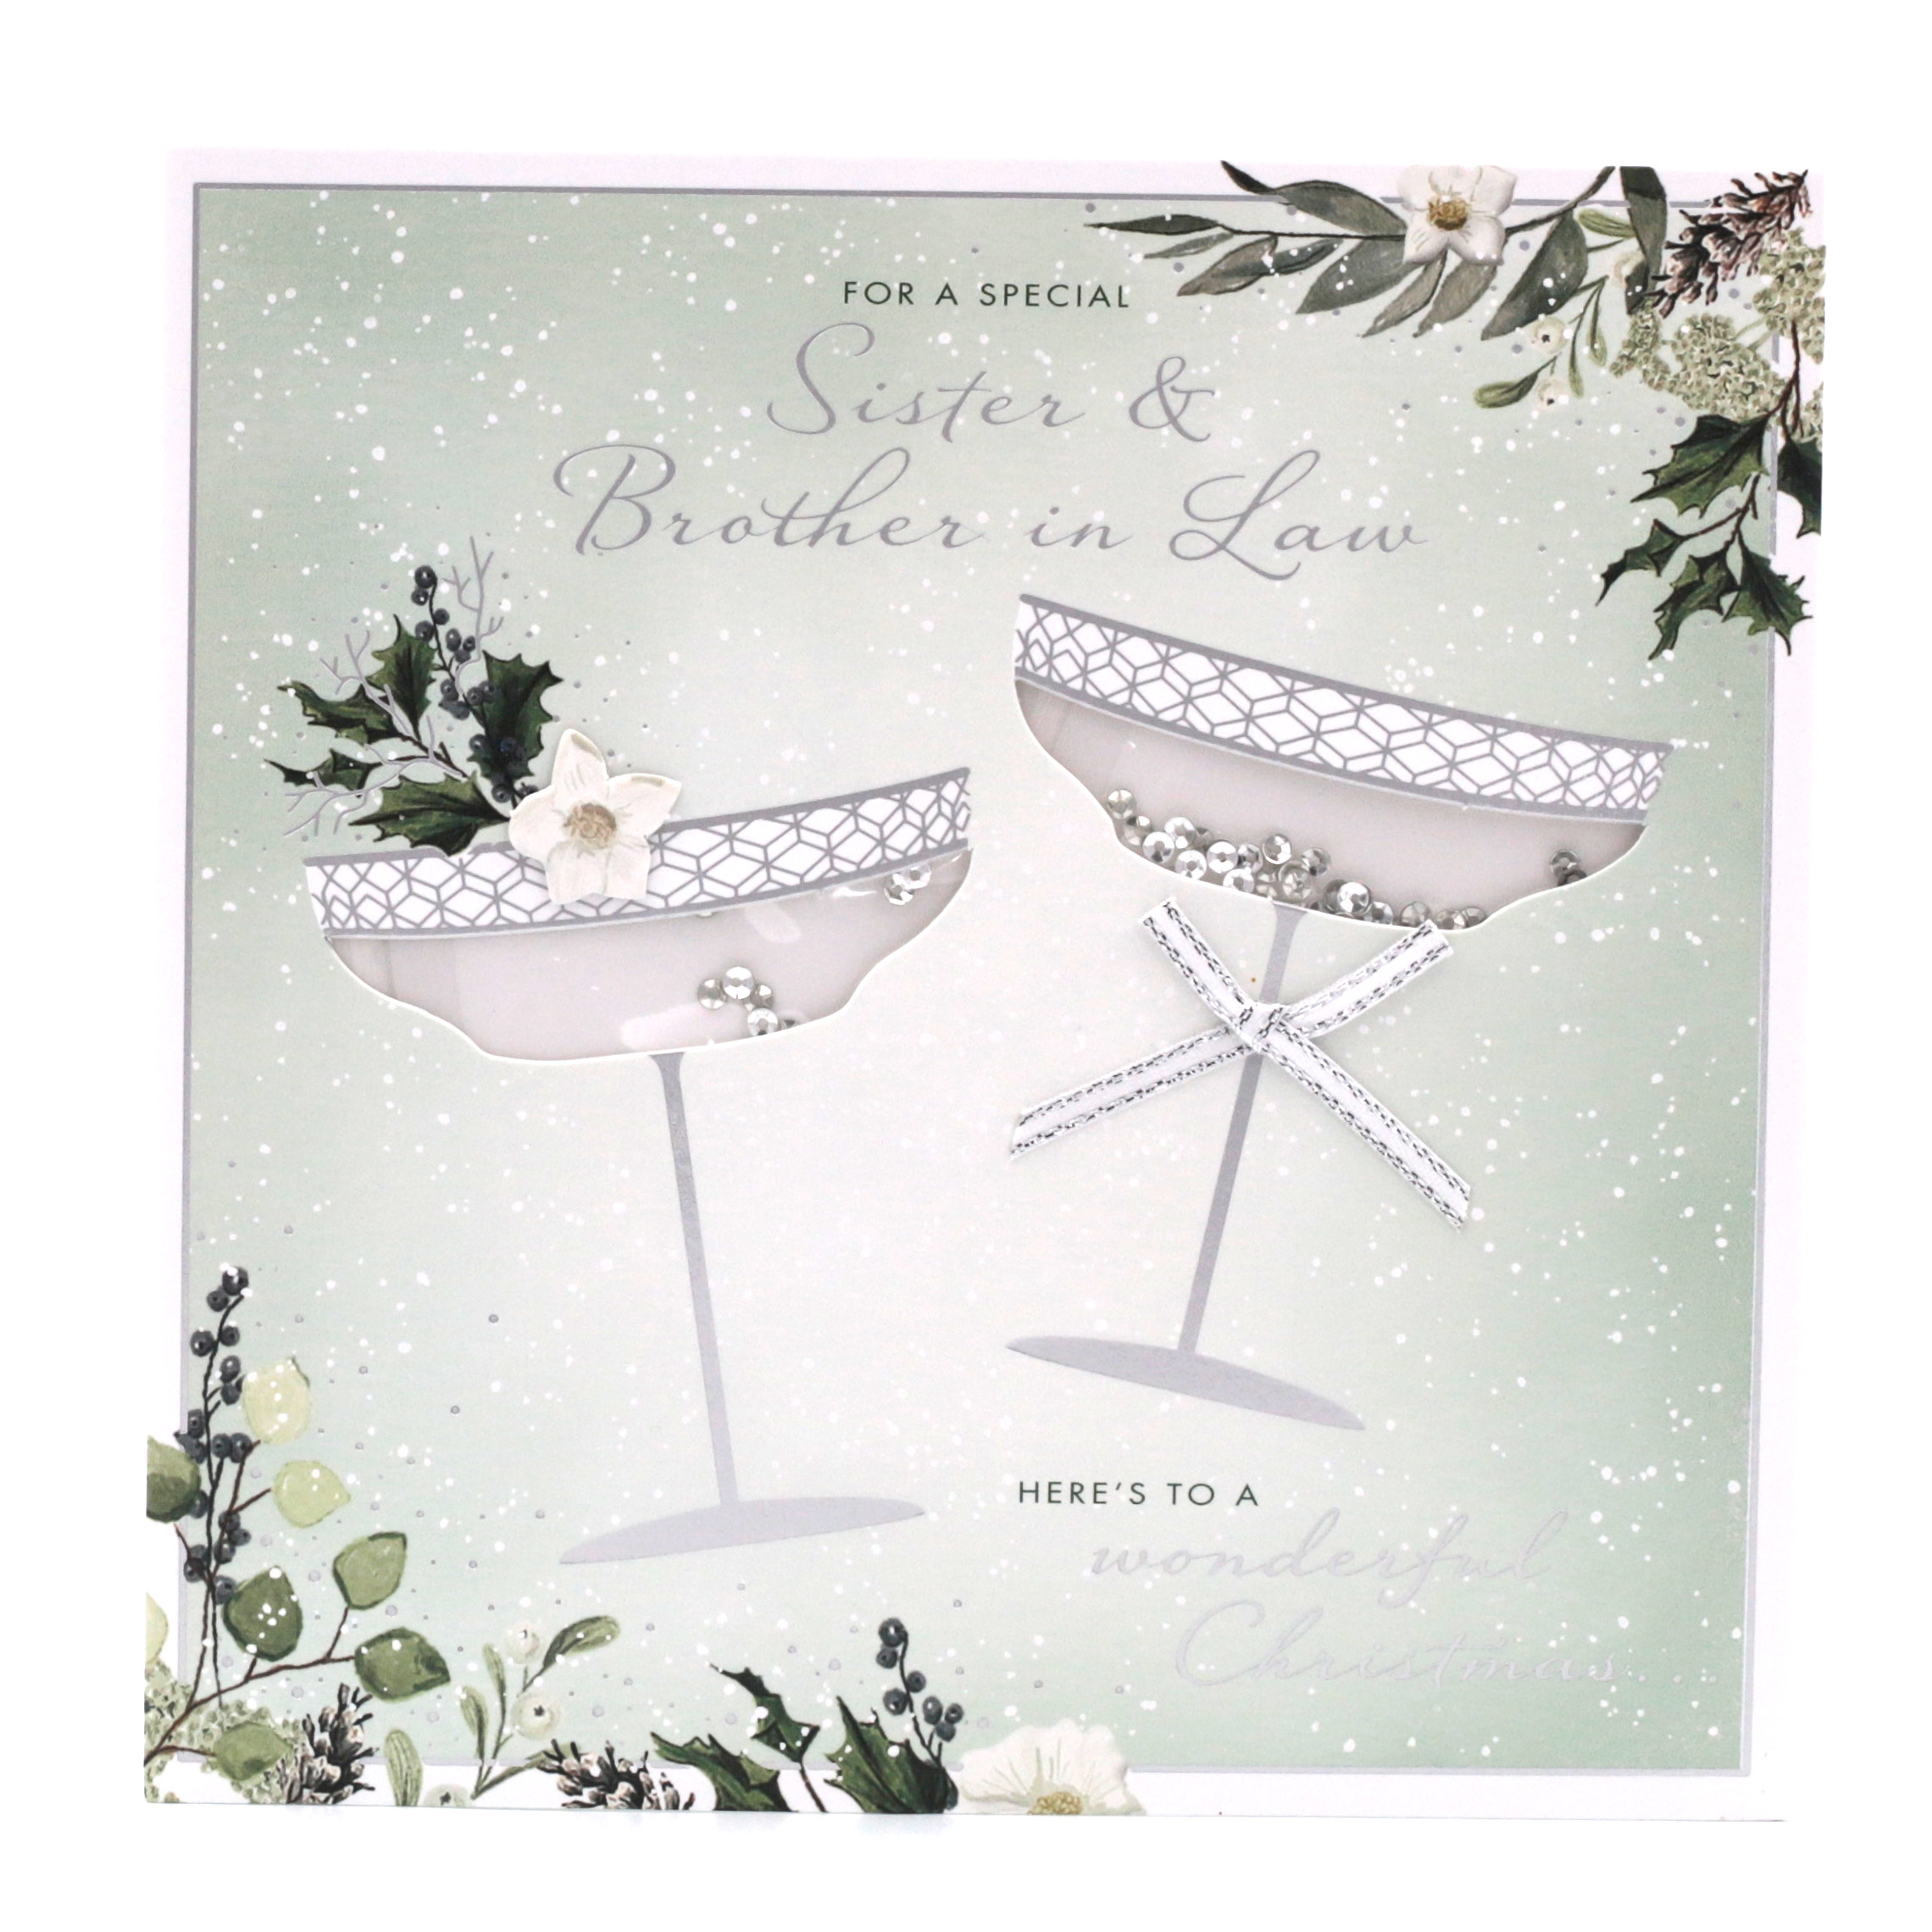 Boutique Christmas Card - Sister And Brother-In-Law, Wonderful Christmas